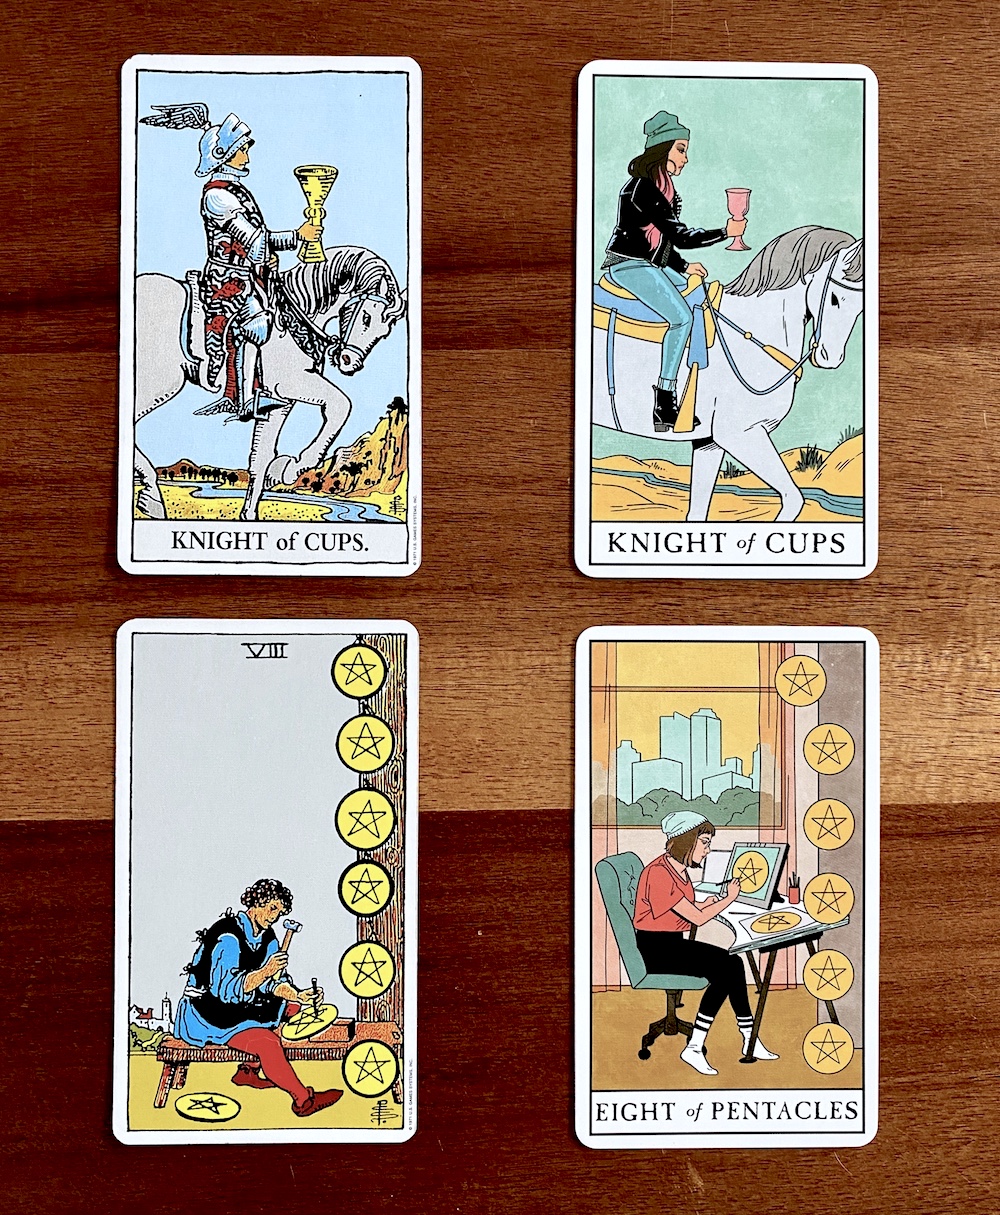 How to Choose a Tarot Deck for Beginners | Happy As Annie - The Modern Witch Tarot Deck is a fresh, multicultural, more inclusive, and millennial-friendly update to the classic Rider-Waite tarot deck. (Knight of Cups and 8 of Pentacles tarot cards from two differnet decks side by side)